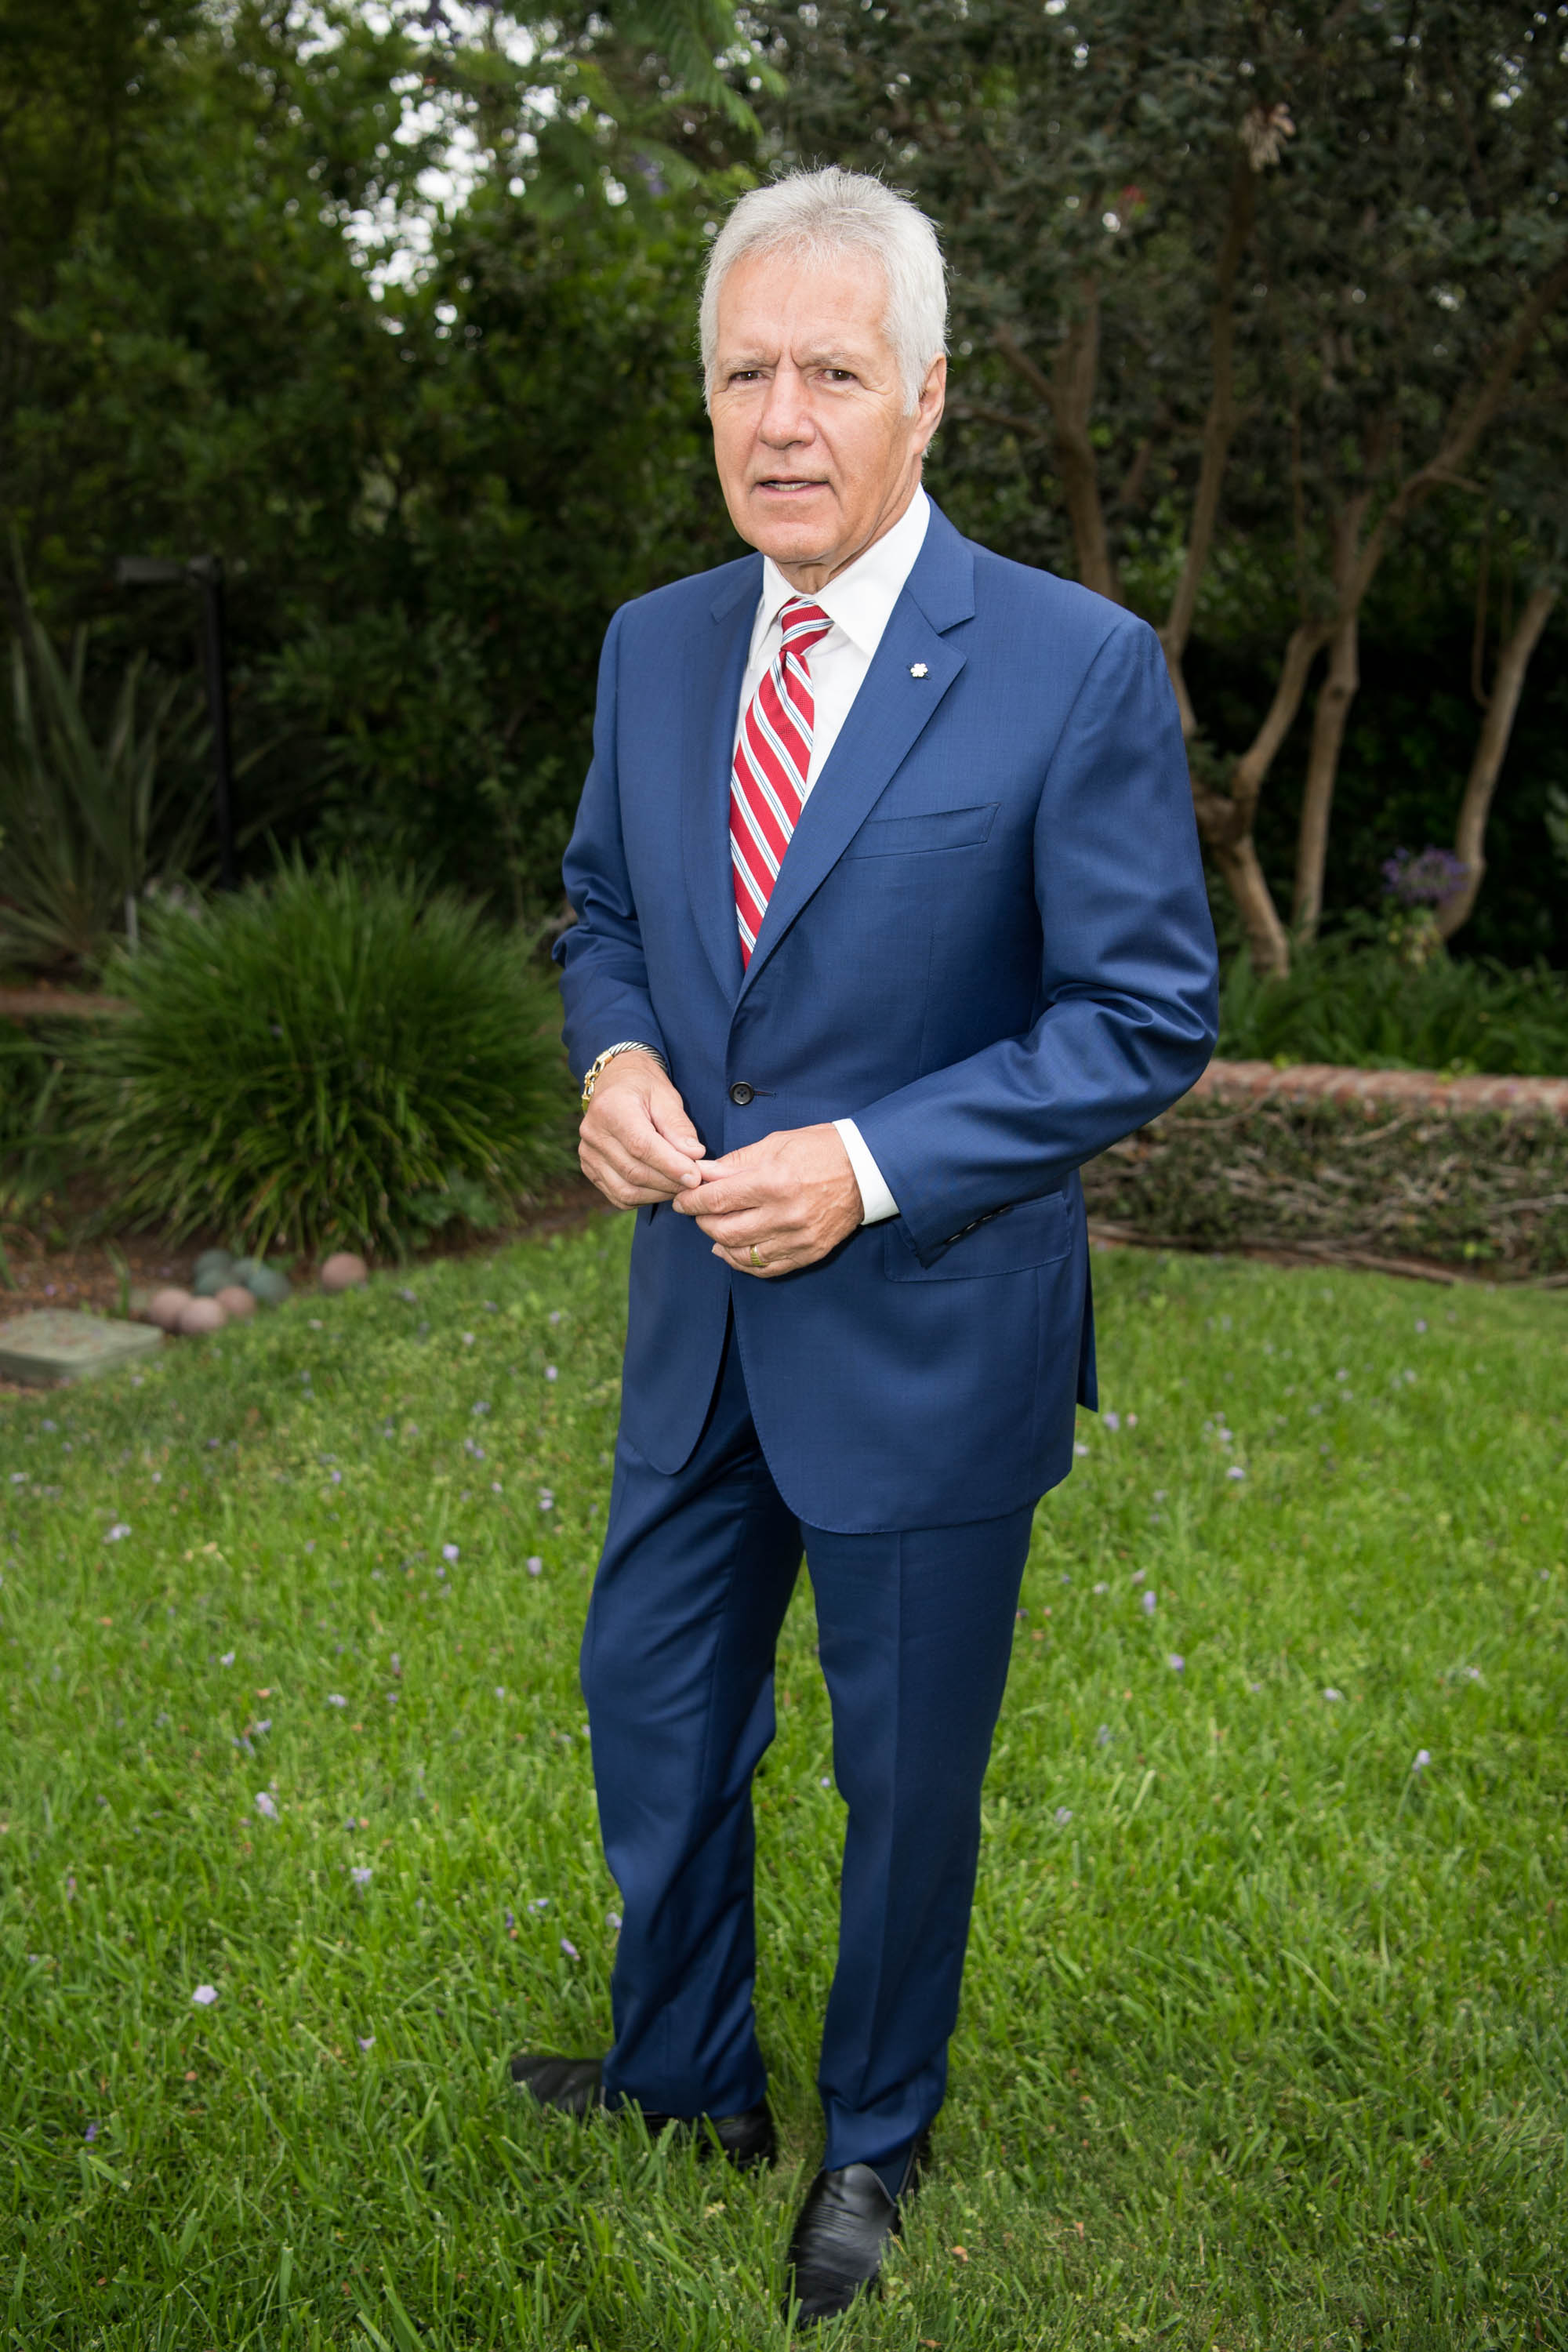 Alex Trebek at the 150th anniversary of Canada's Confederation at the Official Residence of Canada on June 30, 2017 in Los Angeles, California | Photo: Getty Images